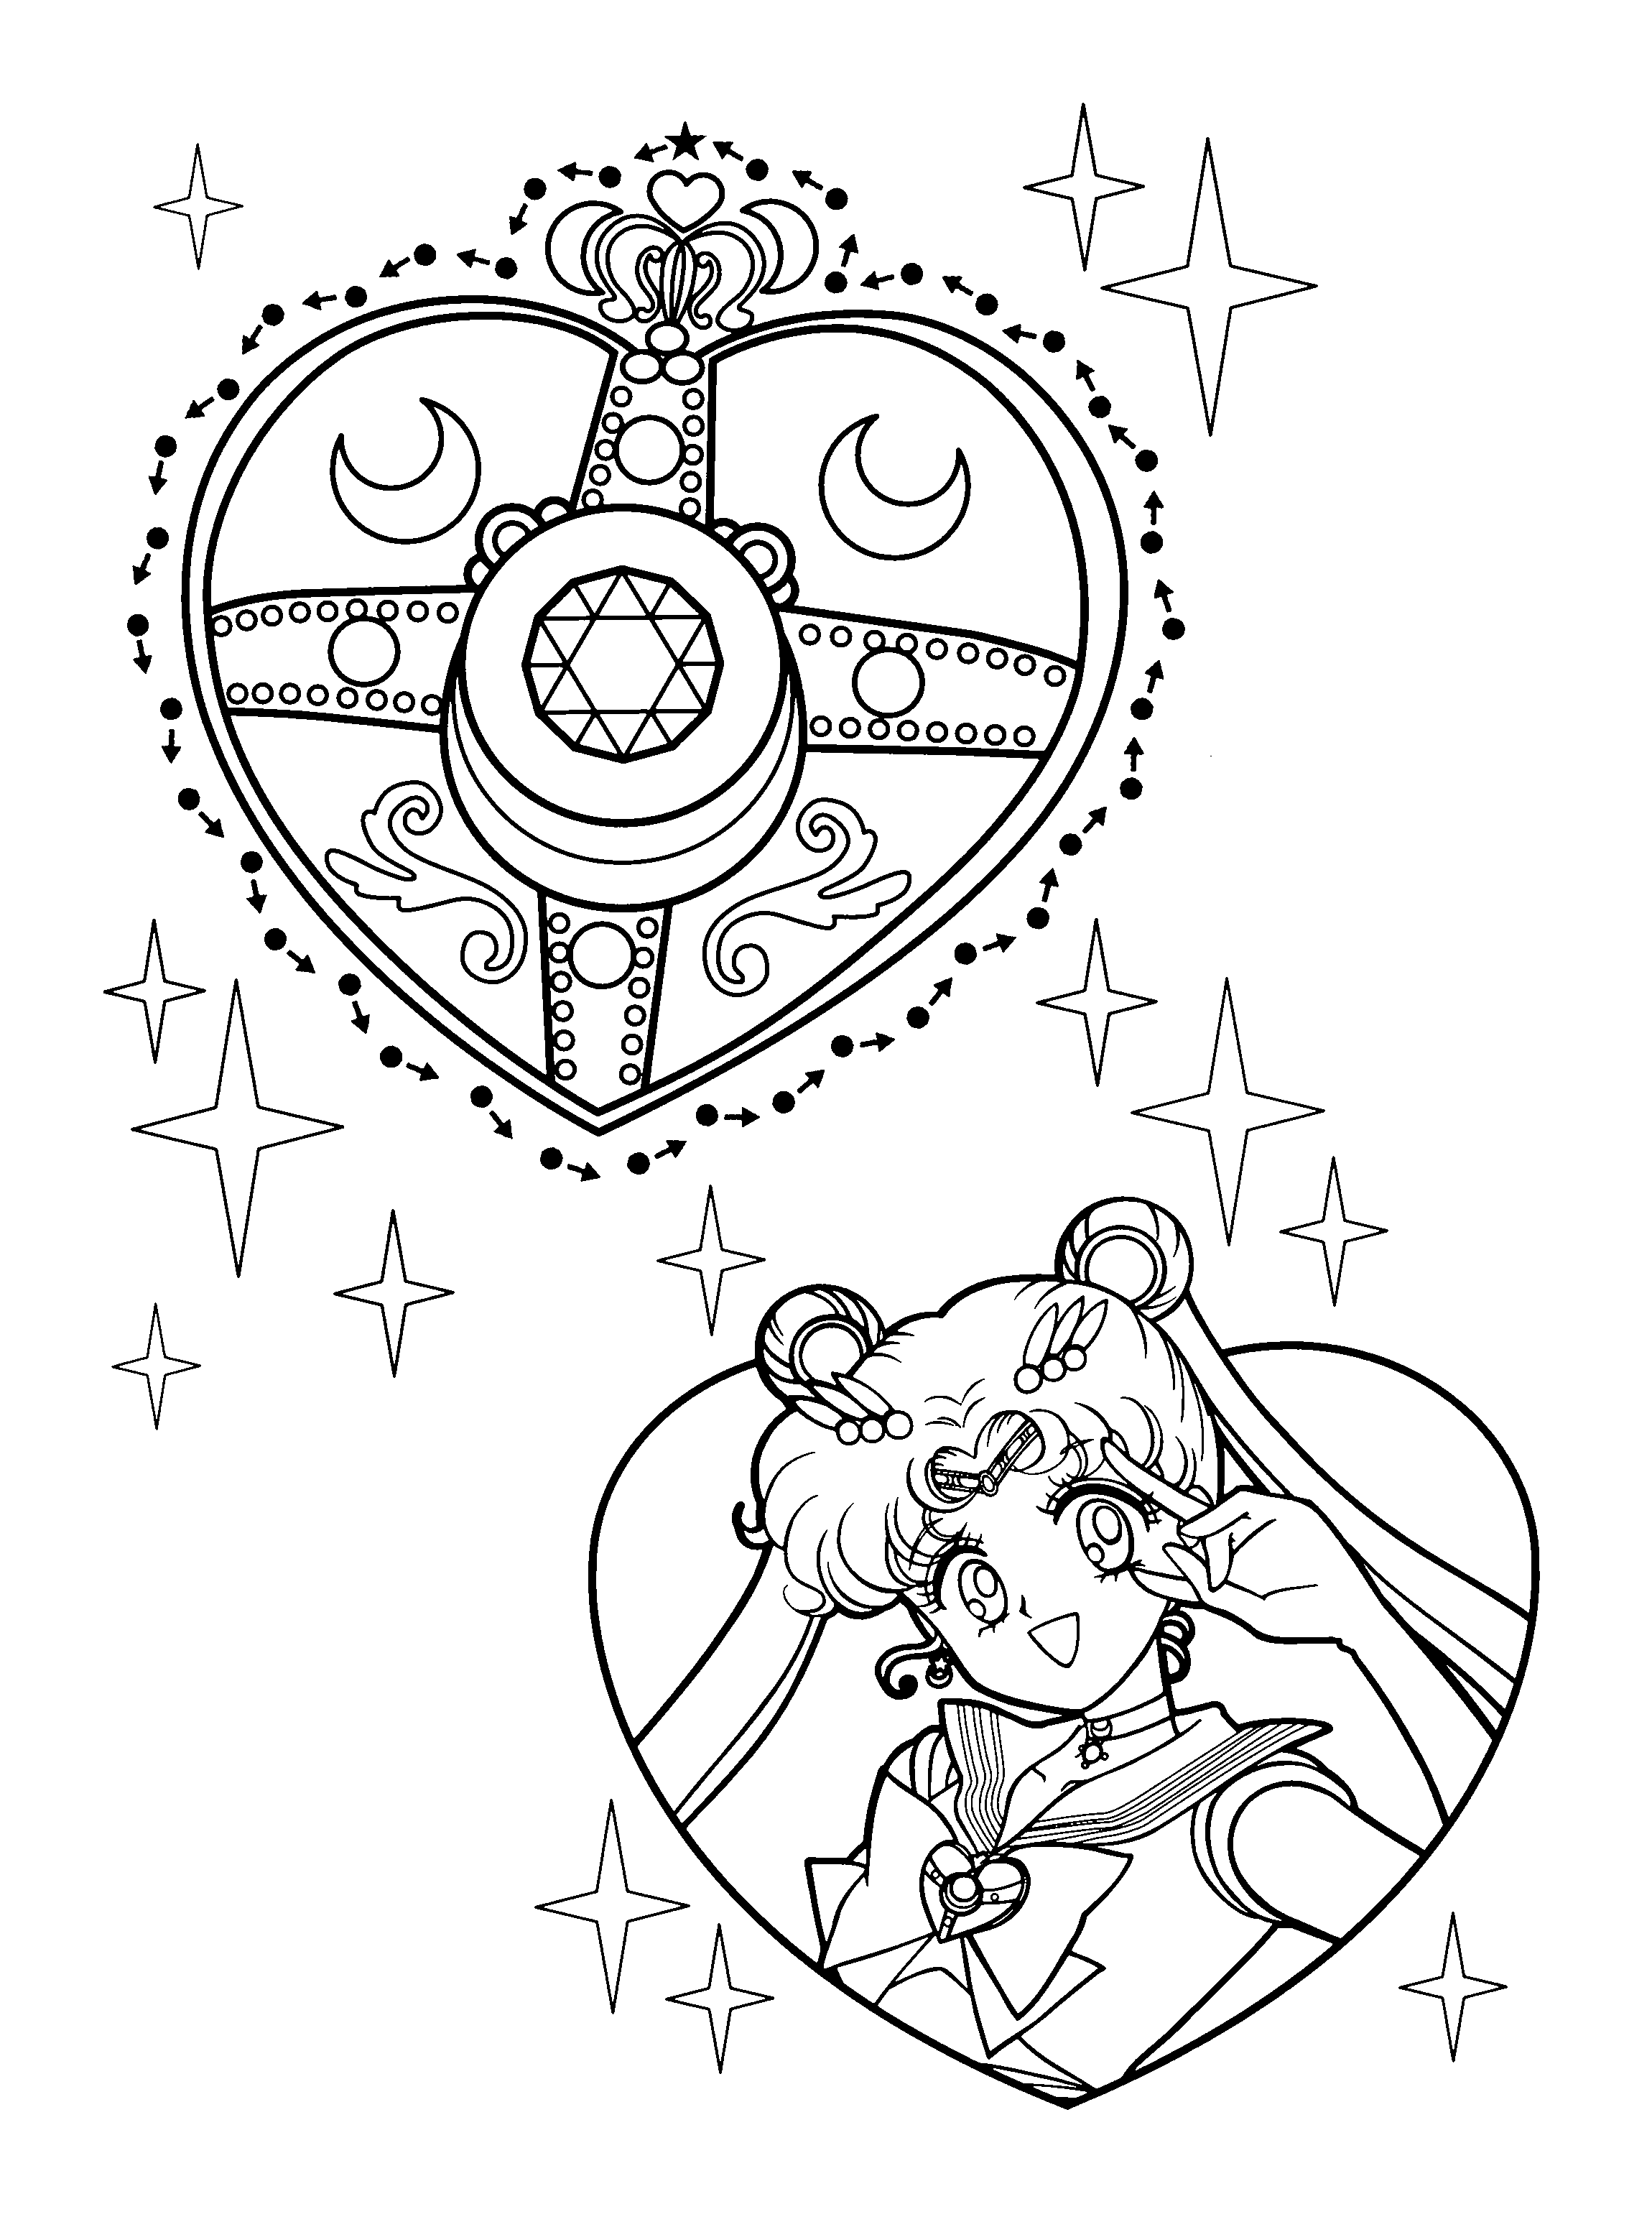 sailor moon coloring pages sailormoon coloring pages sailor coloring moon pages 